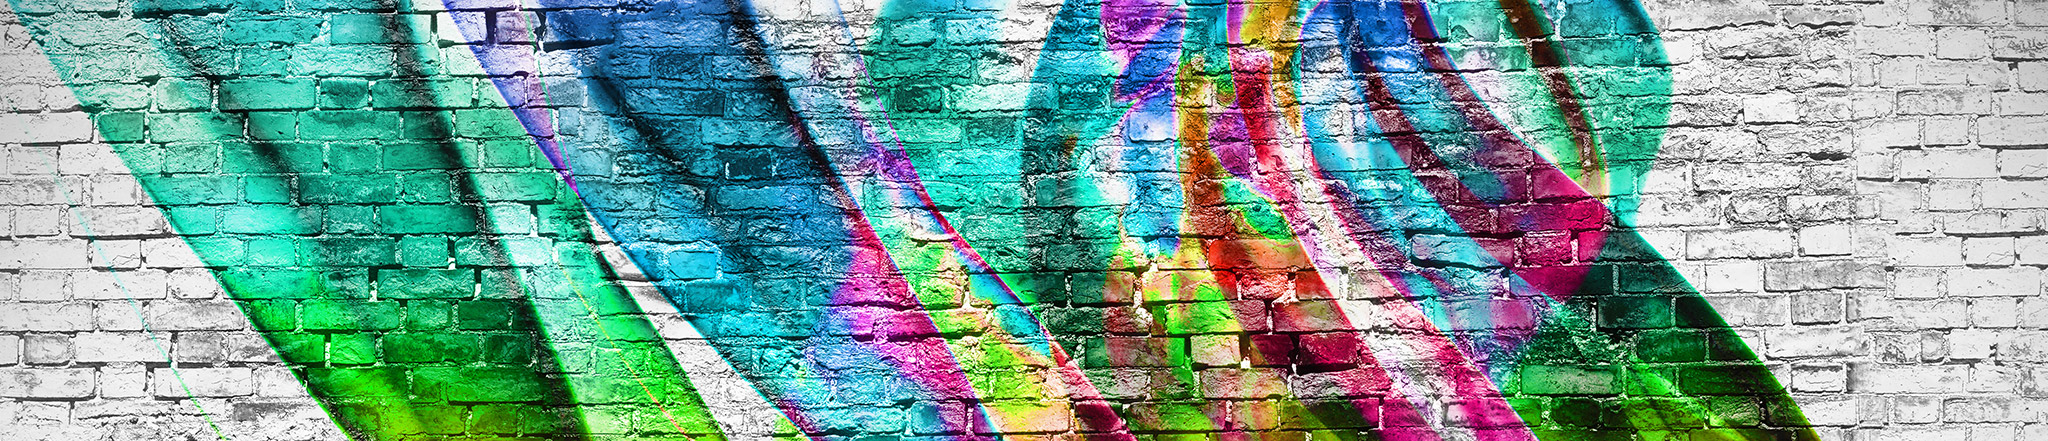 Colorful graffiti against a black and white brick wall